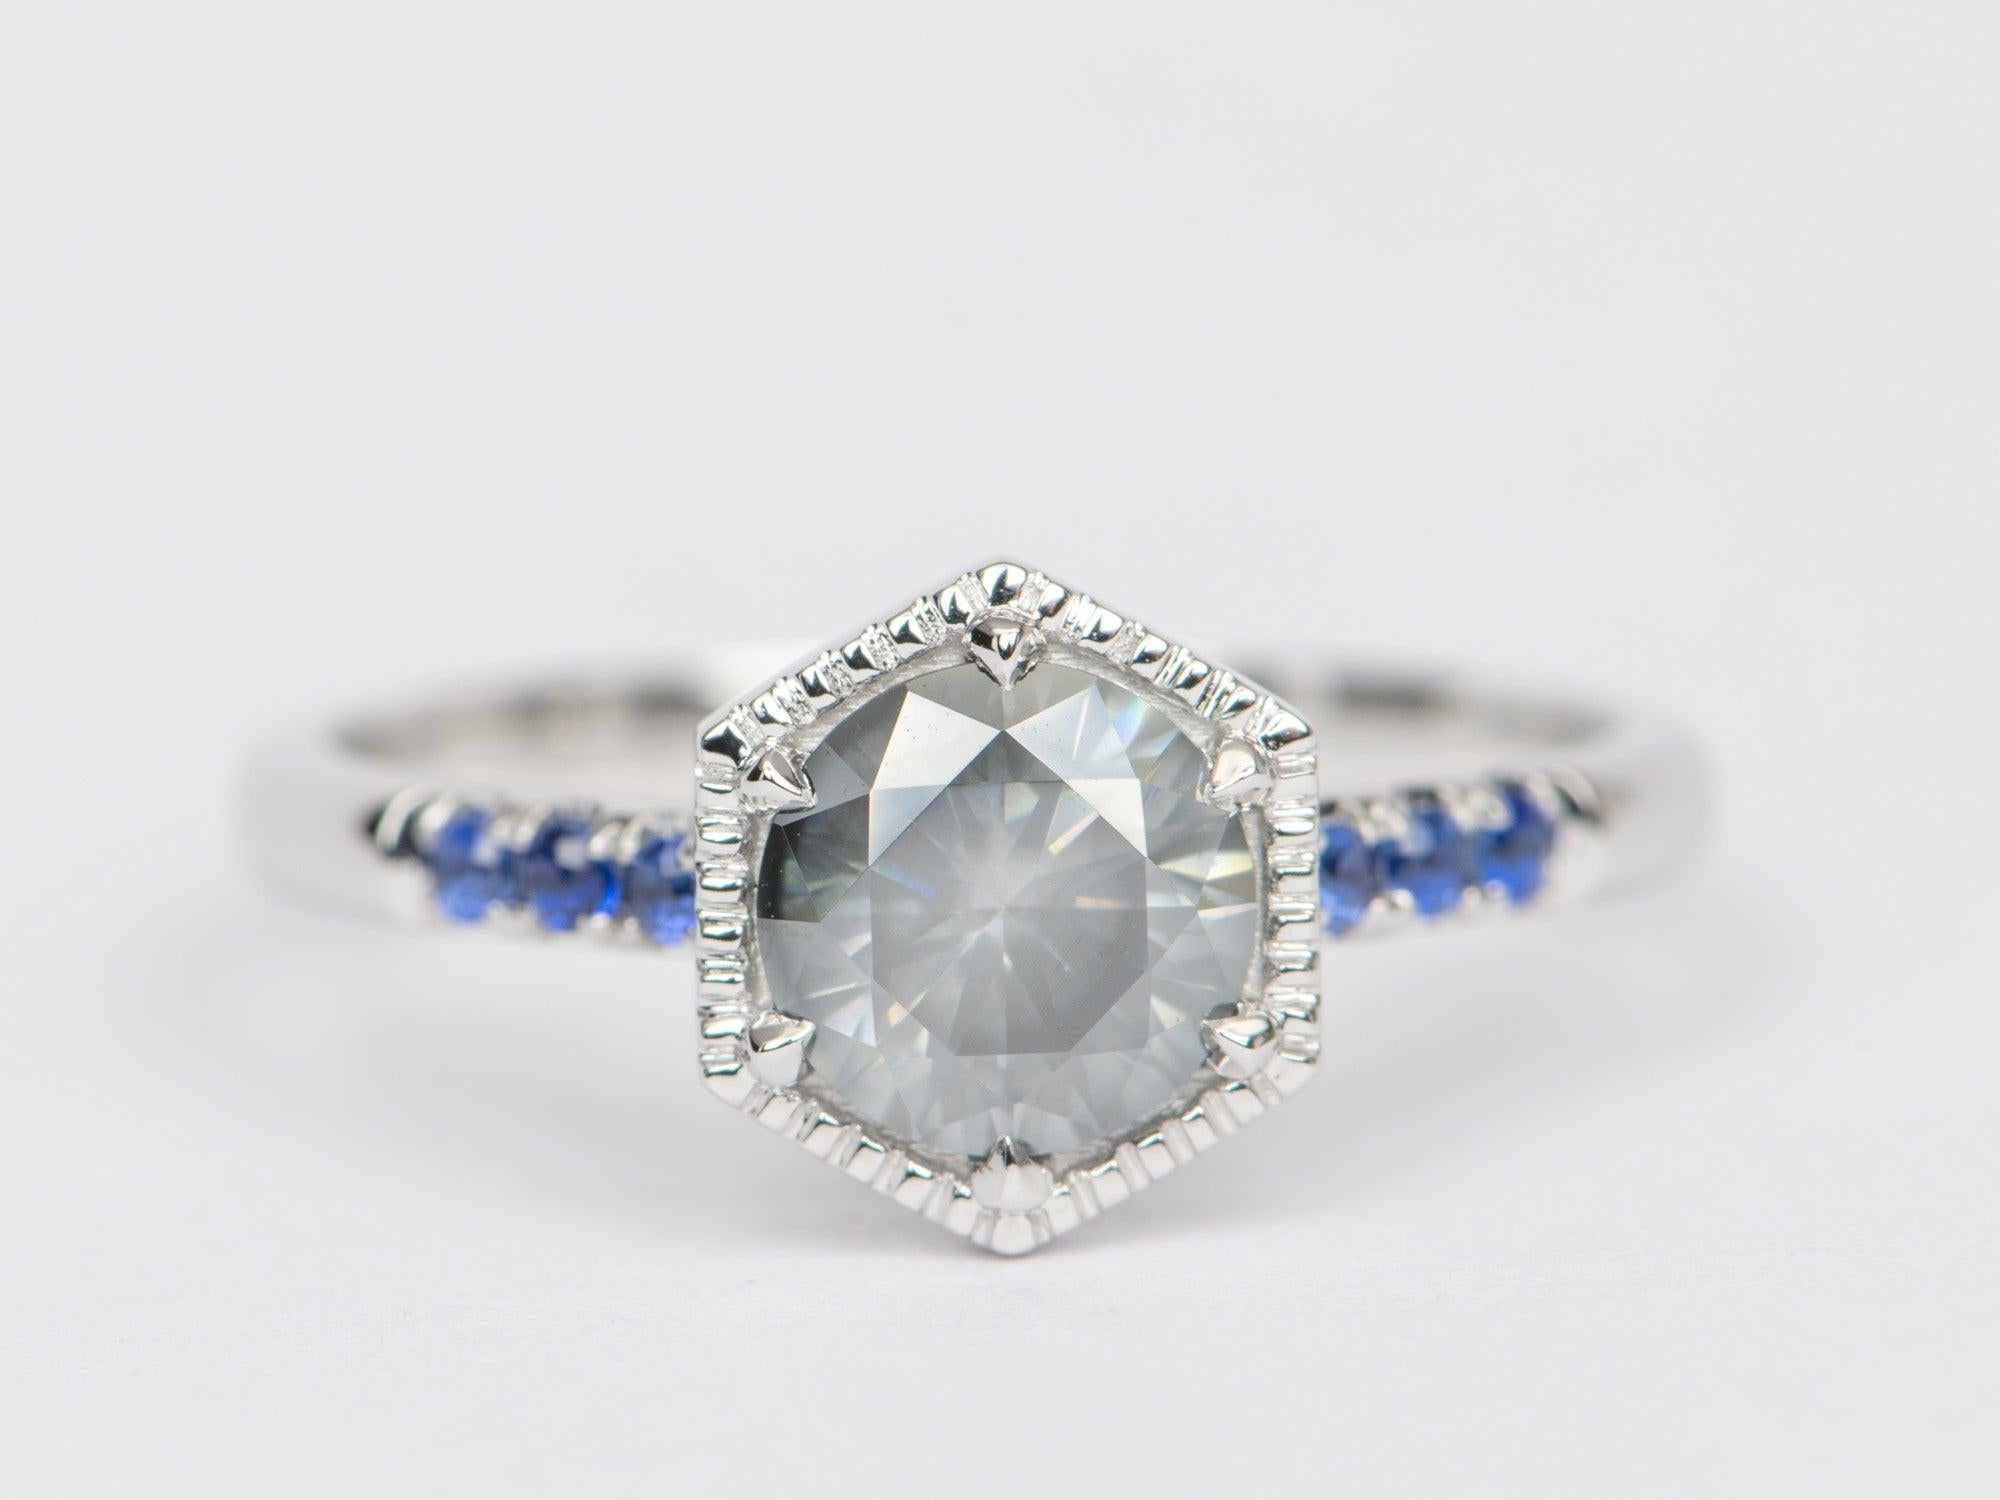 ♥ Solid 14K white gold ring set with a hexagon-shaped grey Moissanite in the center with 3 blue sapphires on each side on the band
♥ The overall setting measures 9mm in width, 8mm in length, and sits 5.2mm tall from the finger

♥ US Size 7 (Free